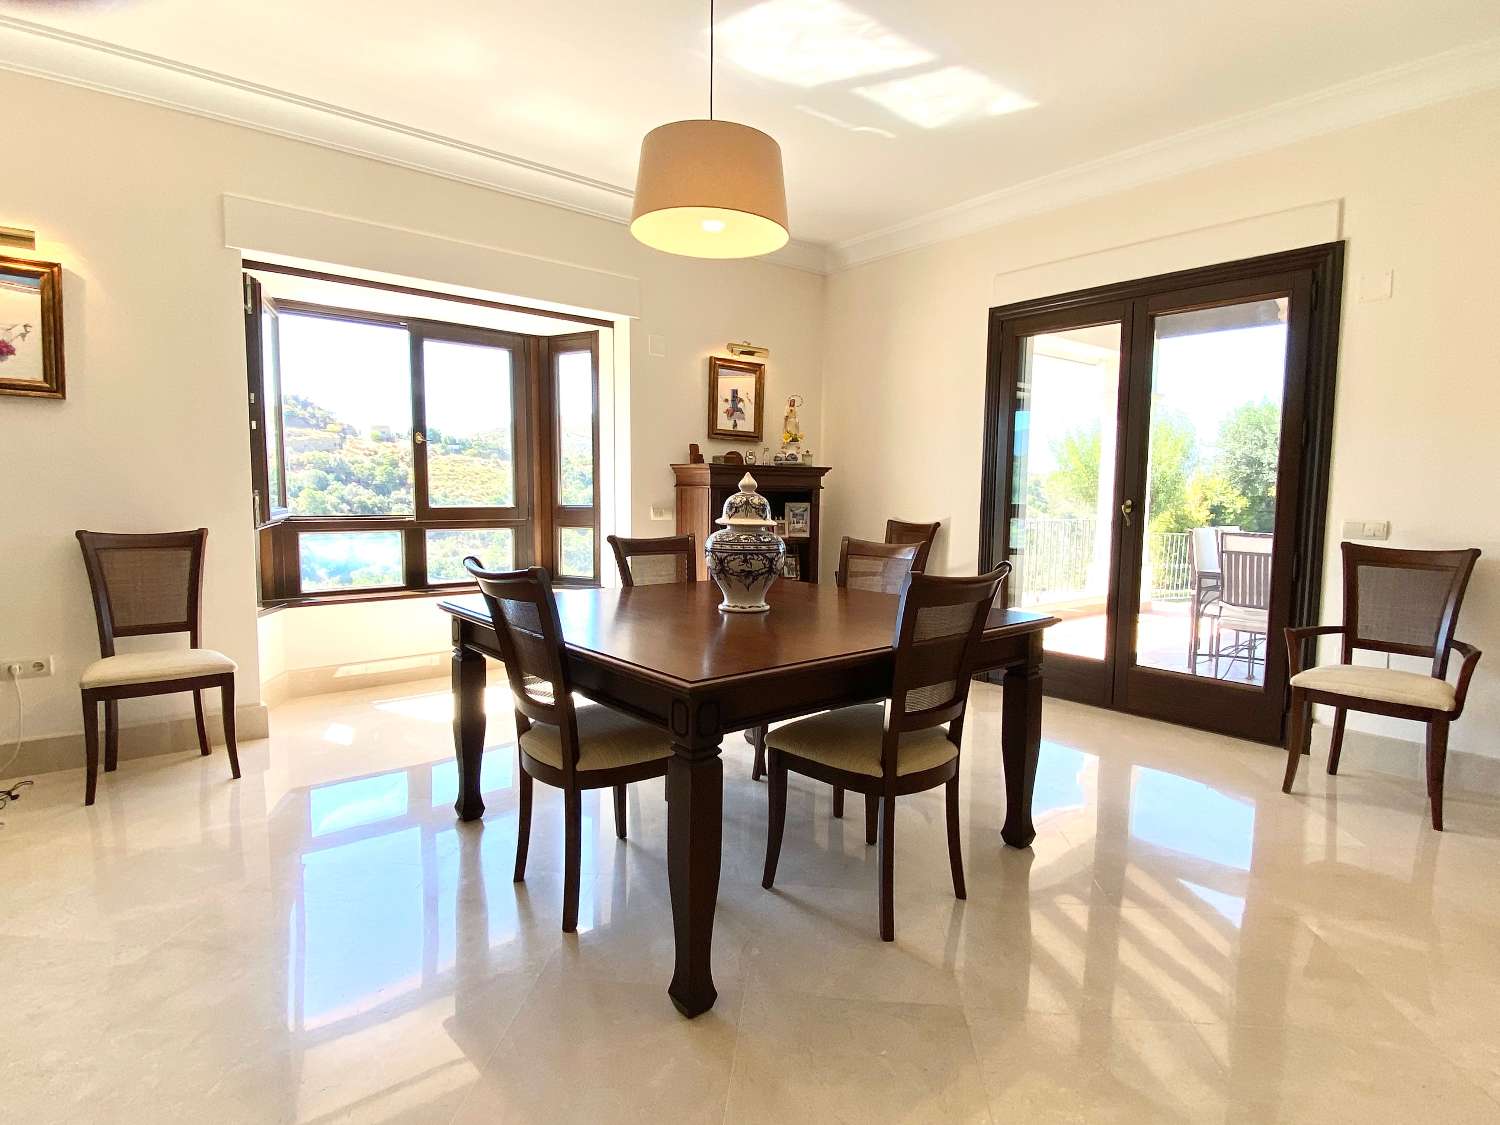 Ideal Home for Golfers, on a large plot of 3,240 sq m, with 24 hour security. Benahavis.